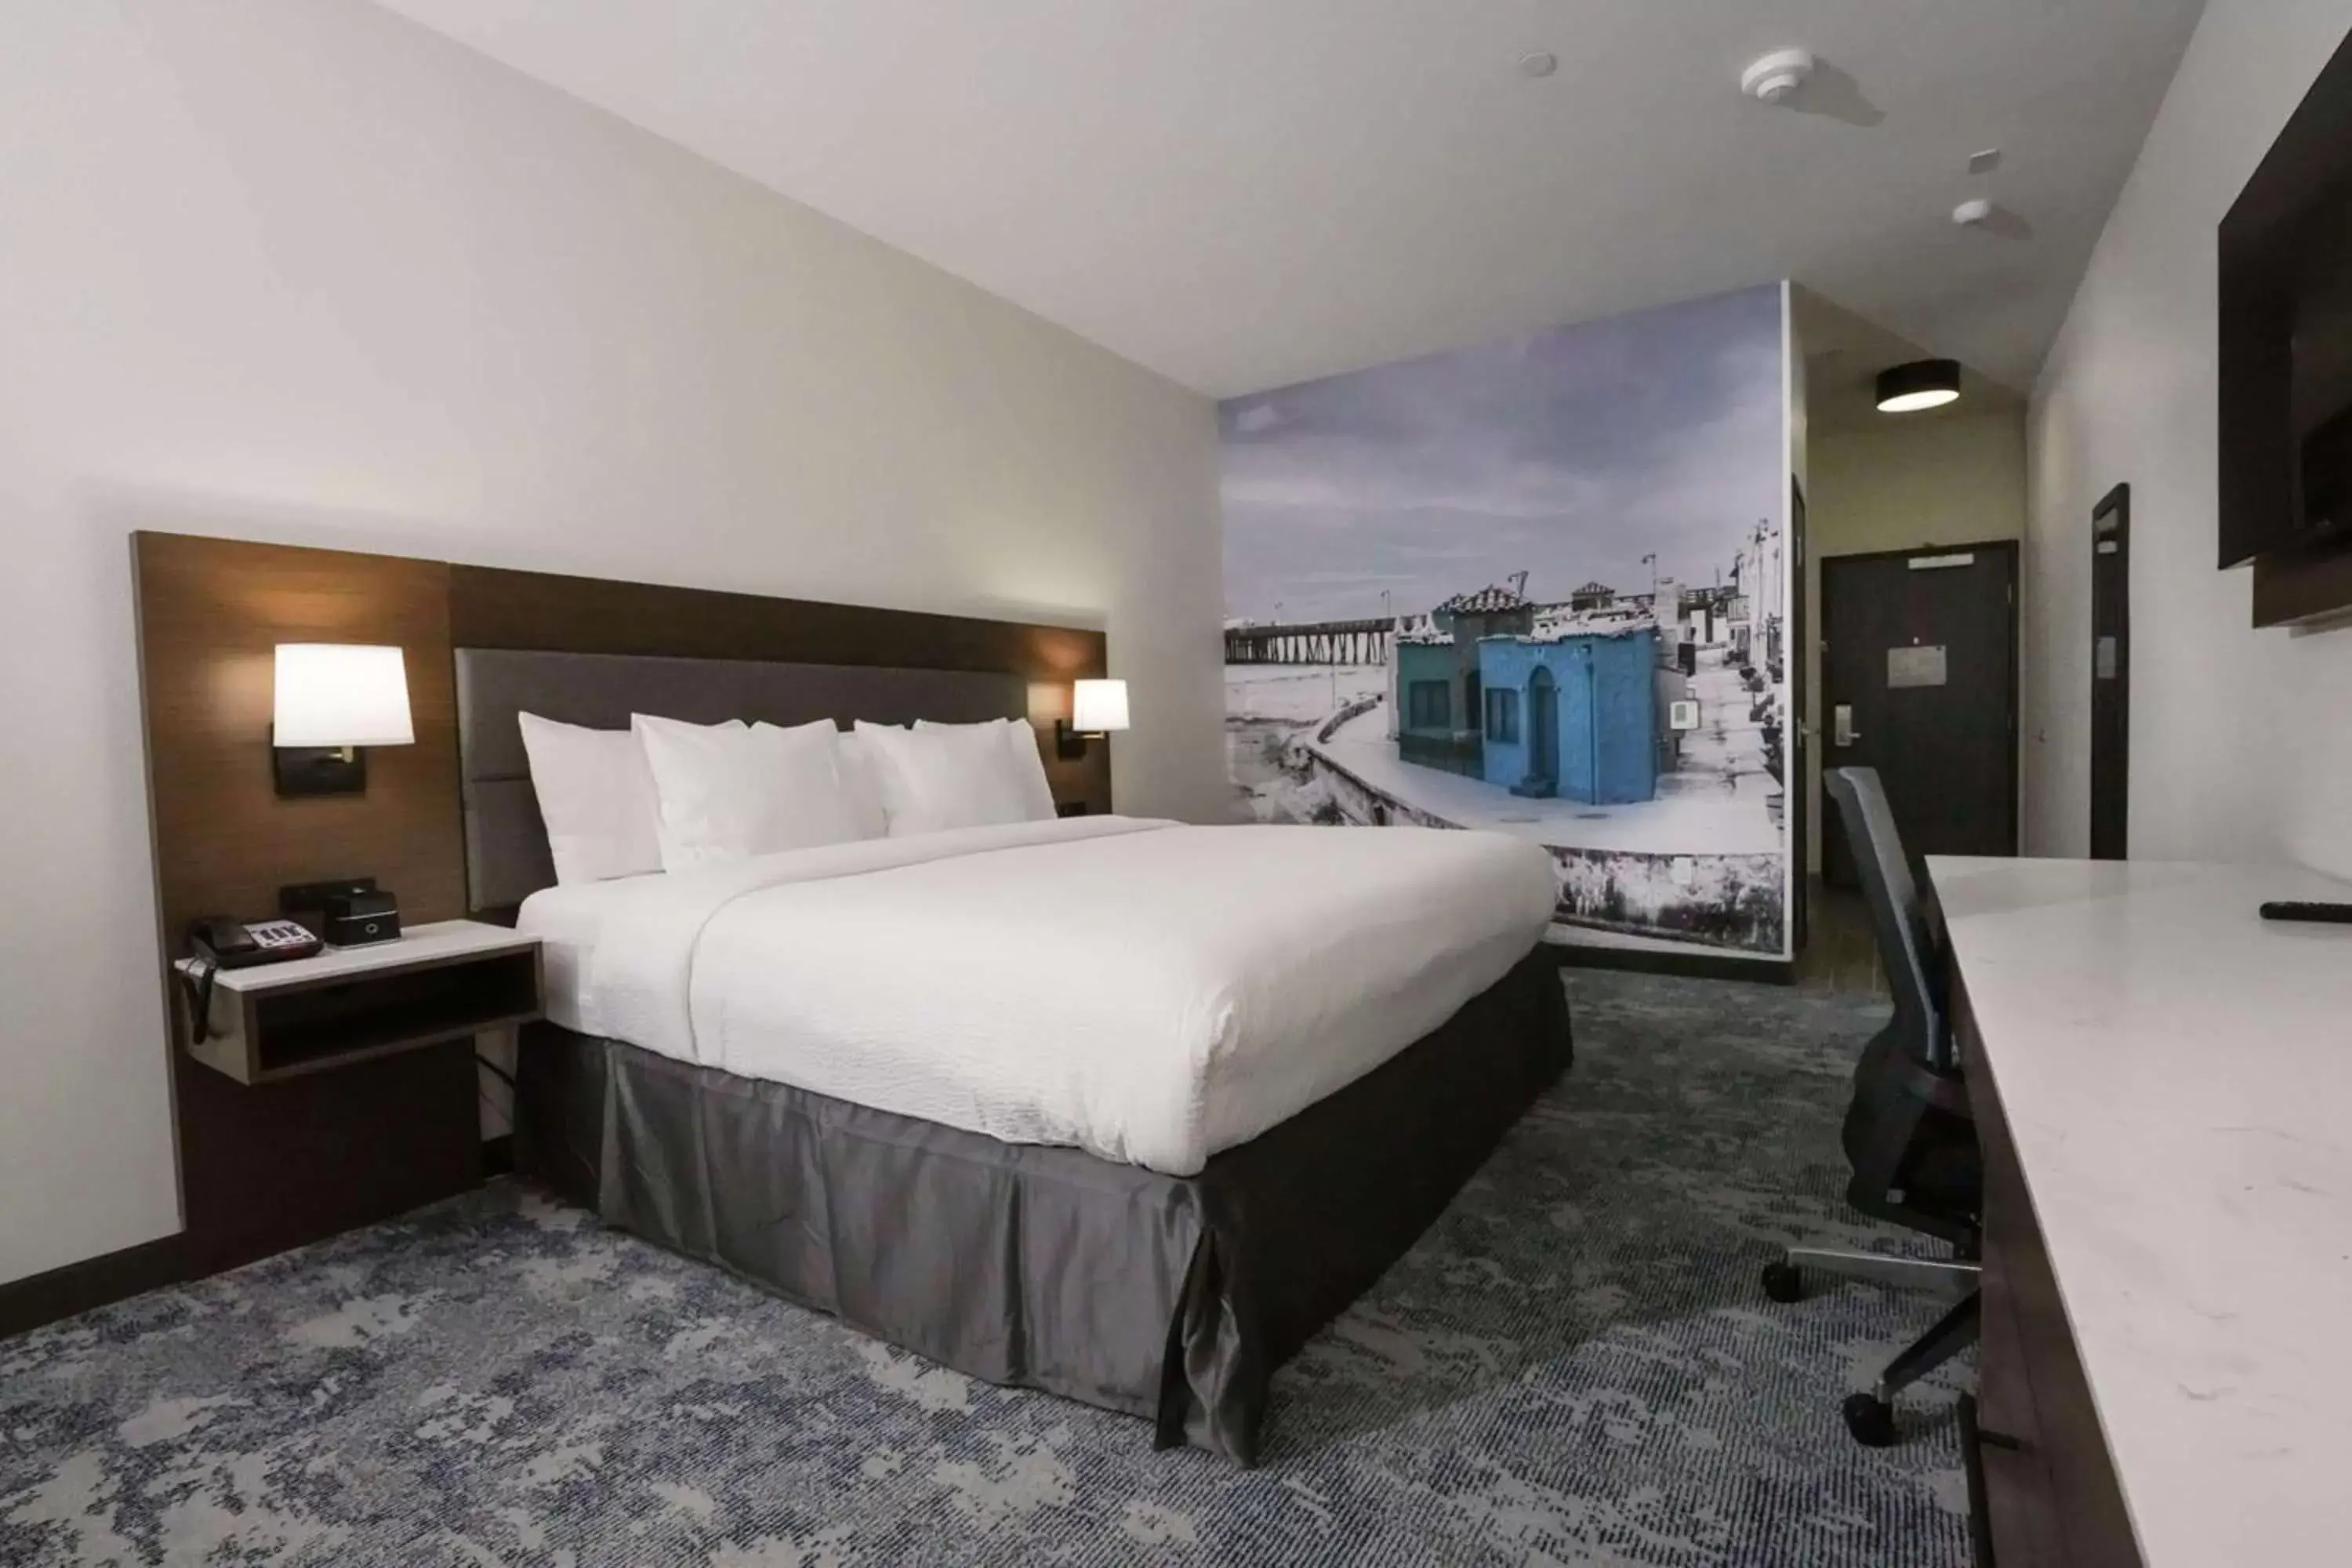 King Room with Hearing/Mobility Access and Bathtub with Grab Bars - Non-Smoking in La Quinta Inn & Suites by Wyndham Santa Cruz